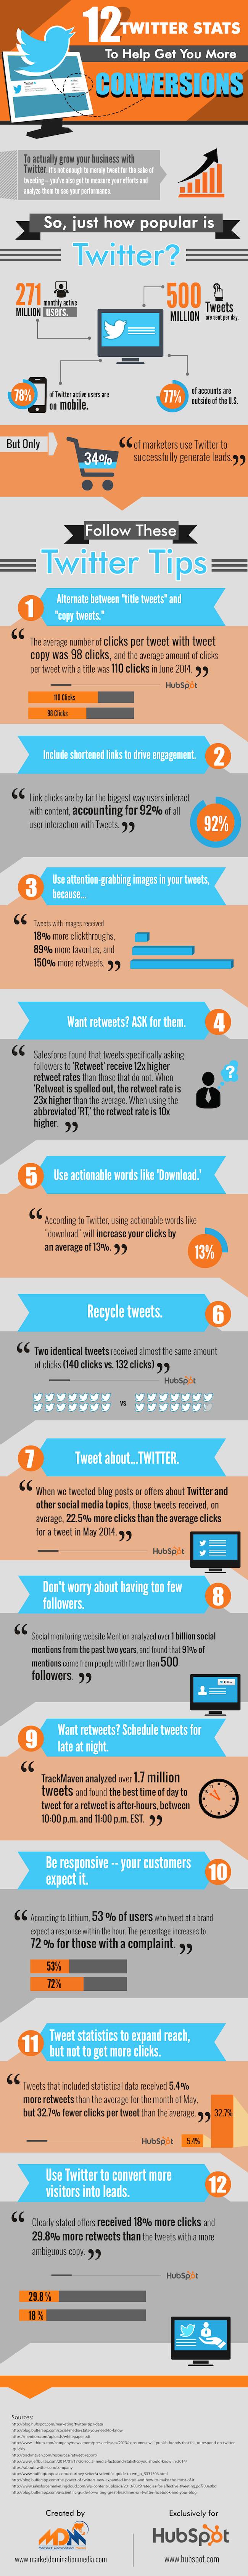 Infographic: 12 Twitter Stats to Help You Get More Conversions